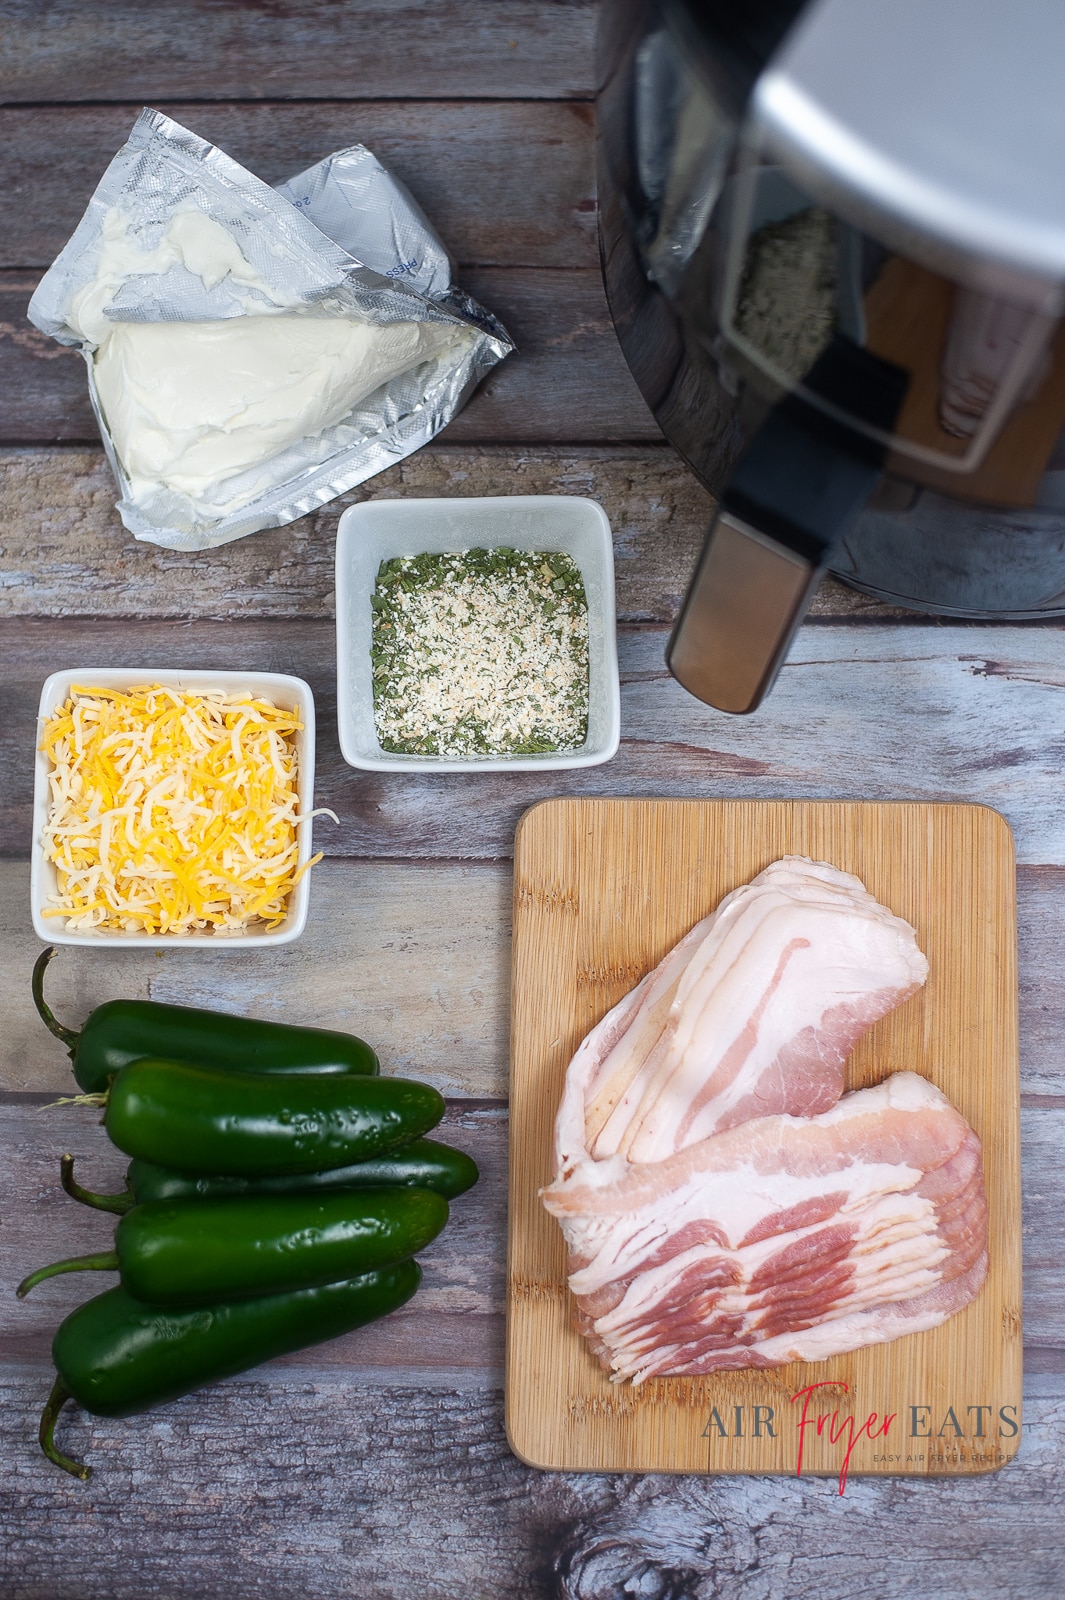 vertical photoof air fryer bacon wrapped jalapeno poppers ingredients. Cream cheese, shredded cheese, jalapeno peppers bacon and ranch seasoning on a wooden table with an air fryer in the top corner